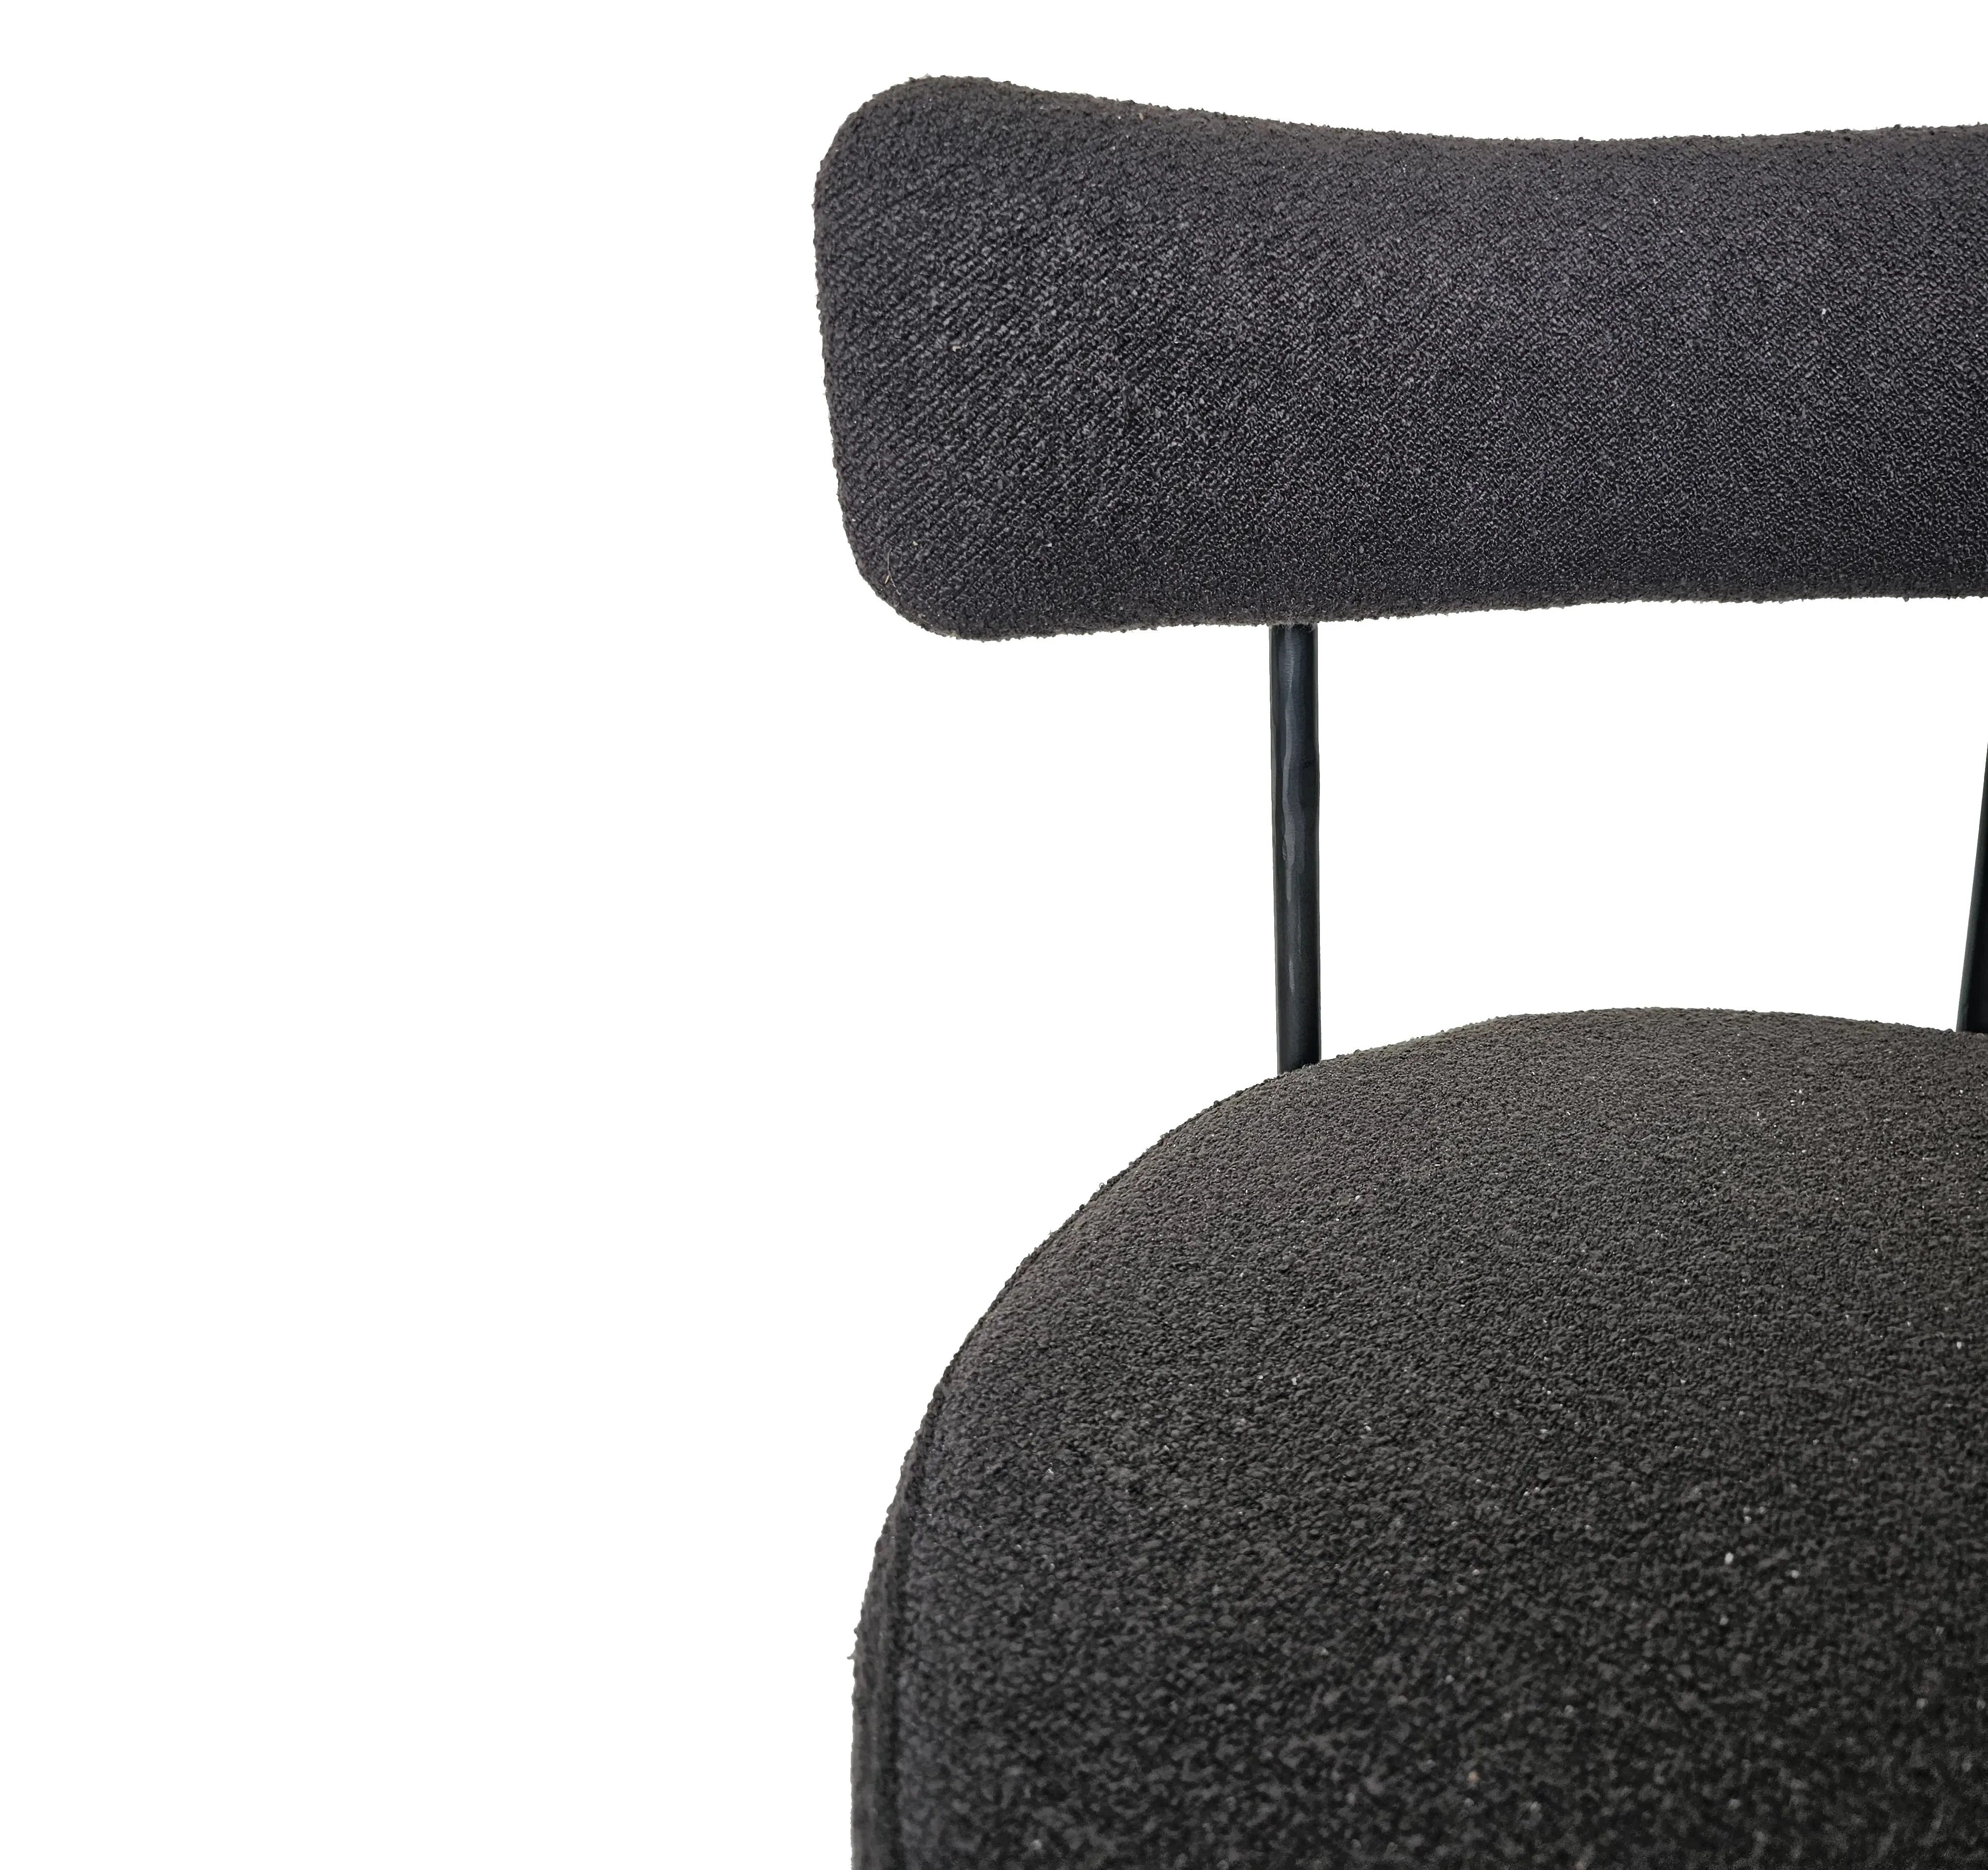 Iron Fabric Dining Chair With Black Towel Fabric